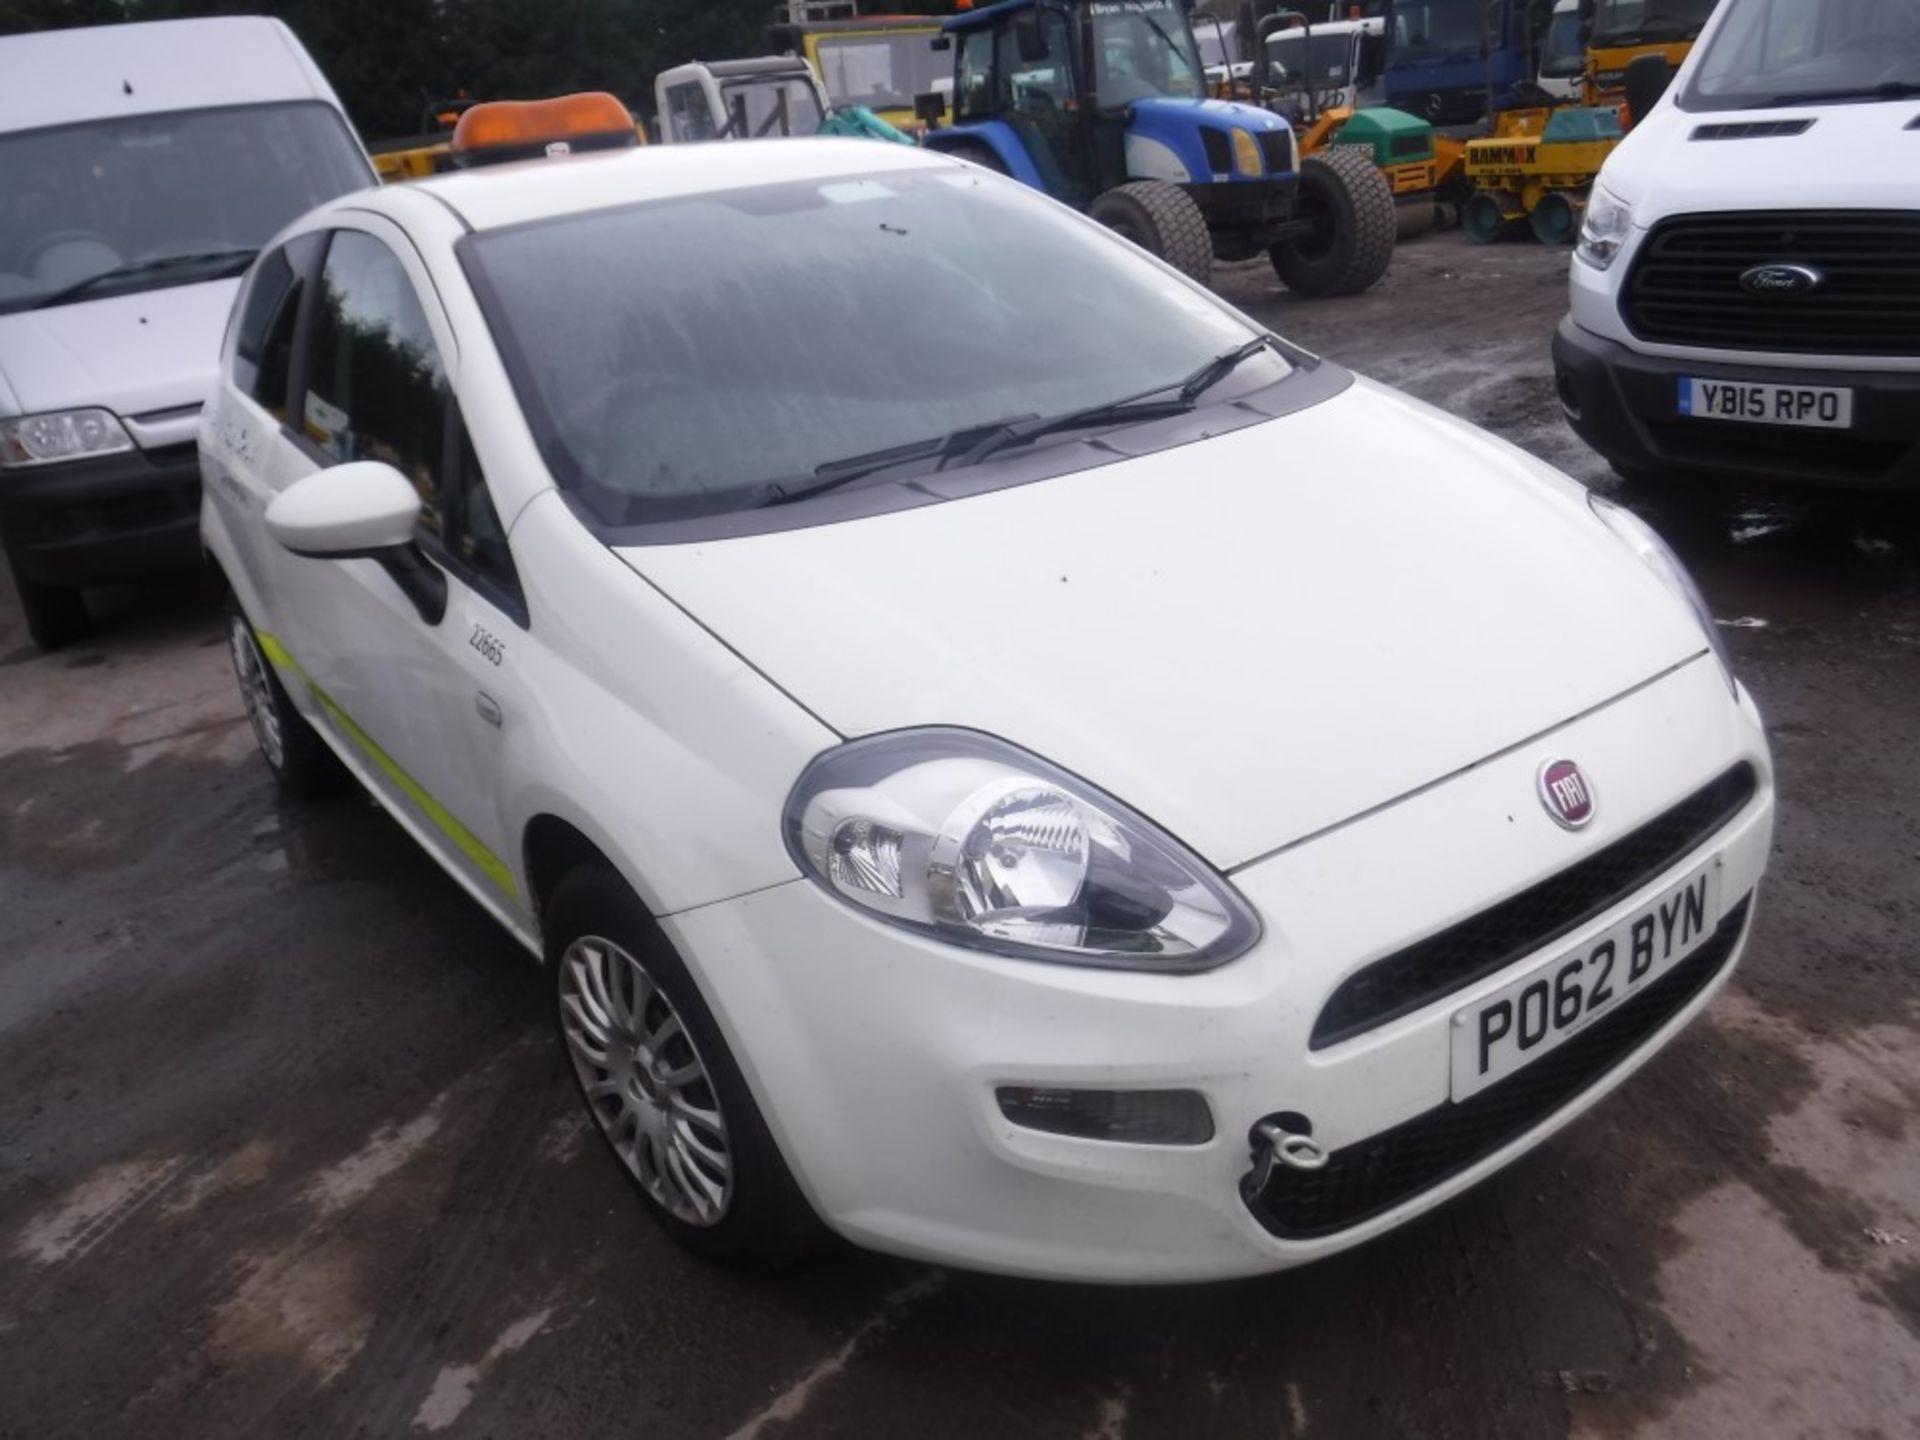 62 reg FIAT PUNTO EVO ACTIVE MULTIJET (DIRECT COUNCIL) 1ST REG 11/12, V5 HERE, 1 OWNER FROM NEW (NON